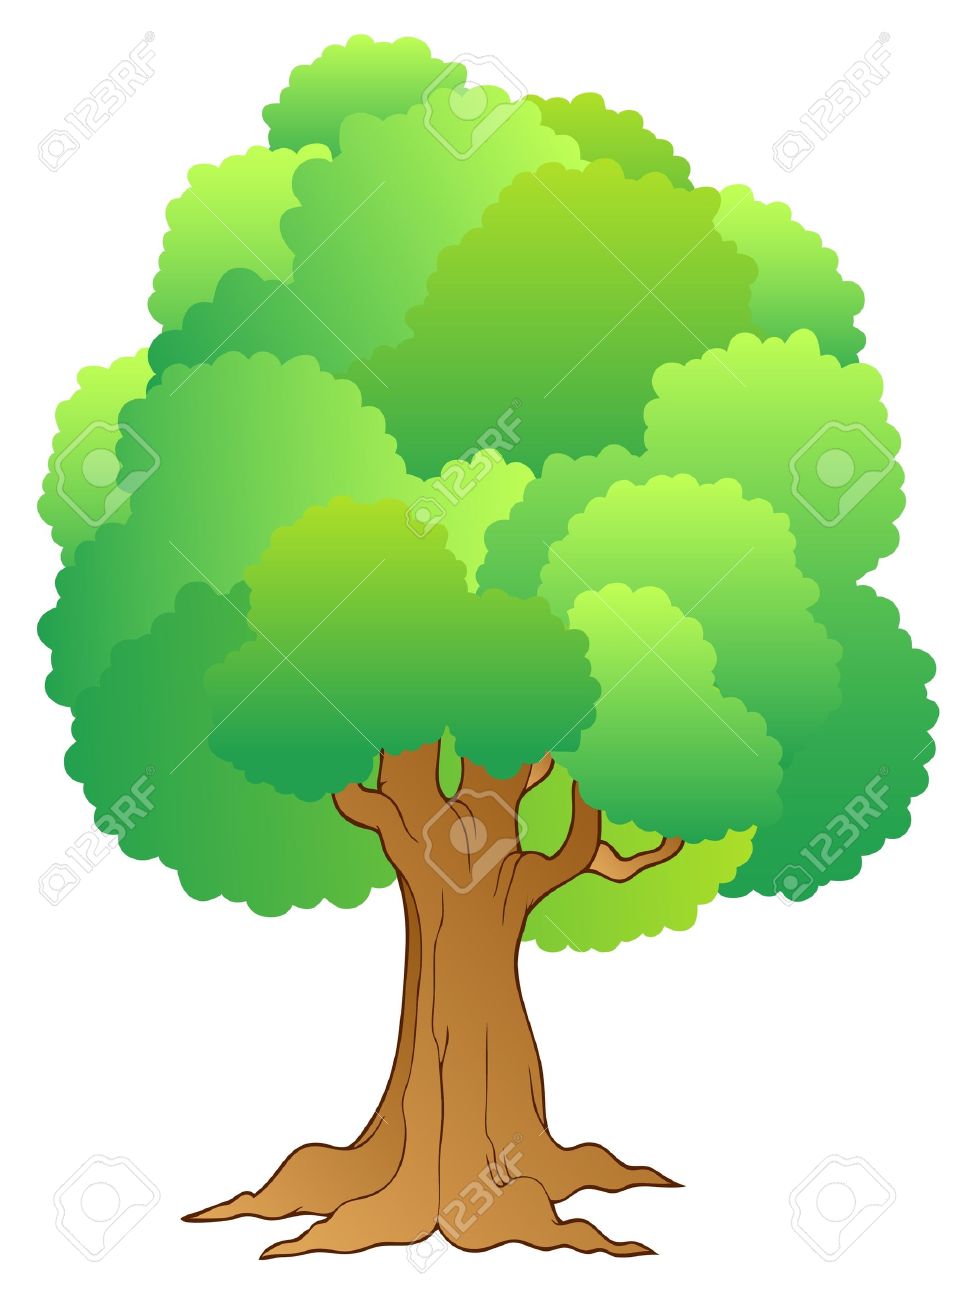 Tree tops clipart - Clipground